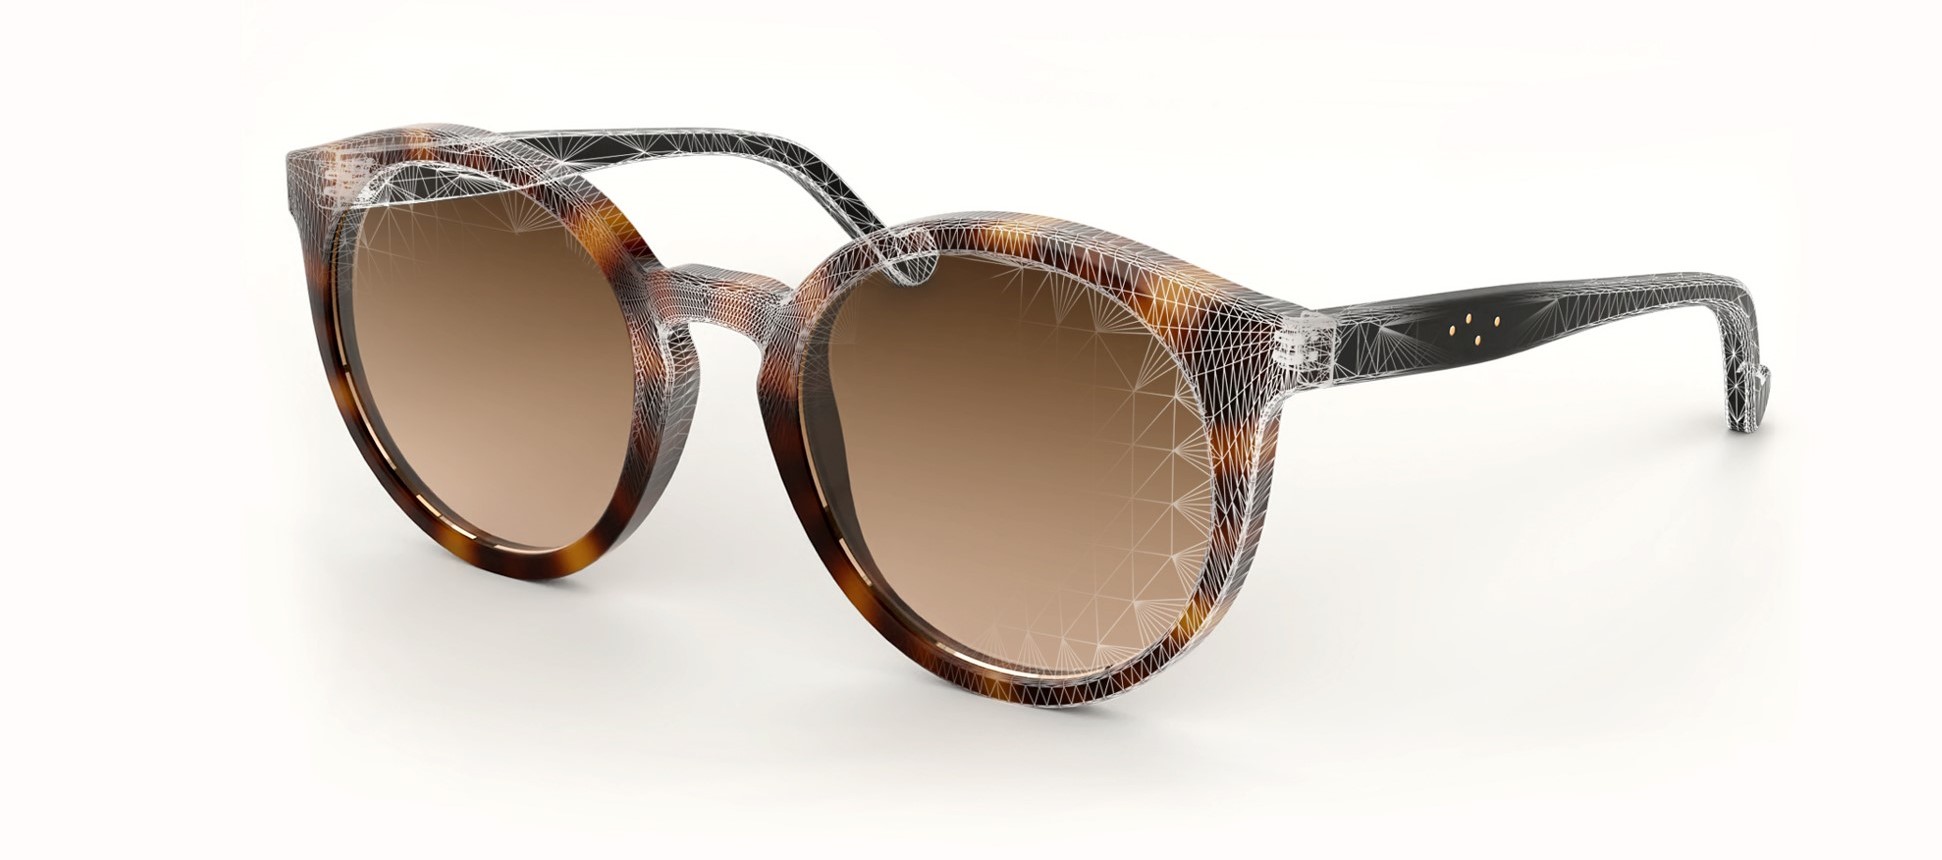 Fittingbox digitizes renowned manufacturers' eyewear catalogs to be available in virtual try-on